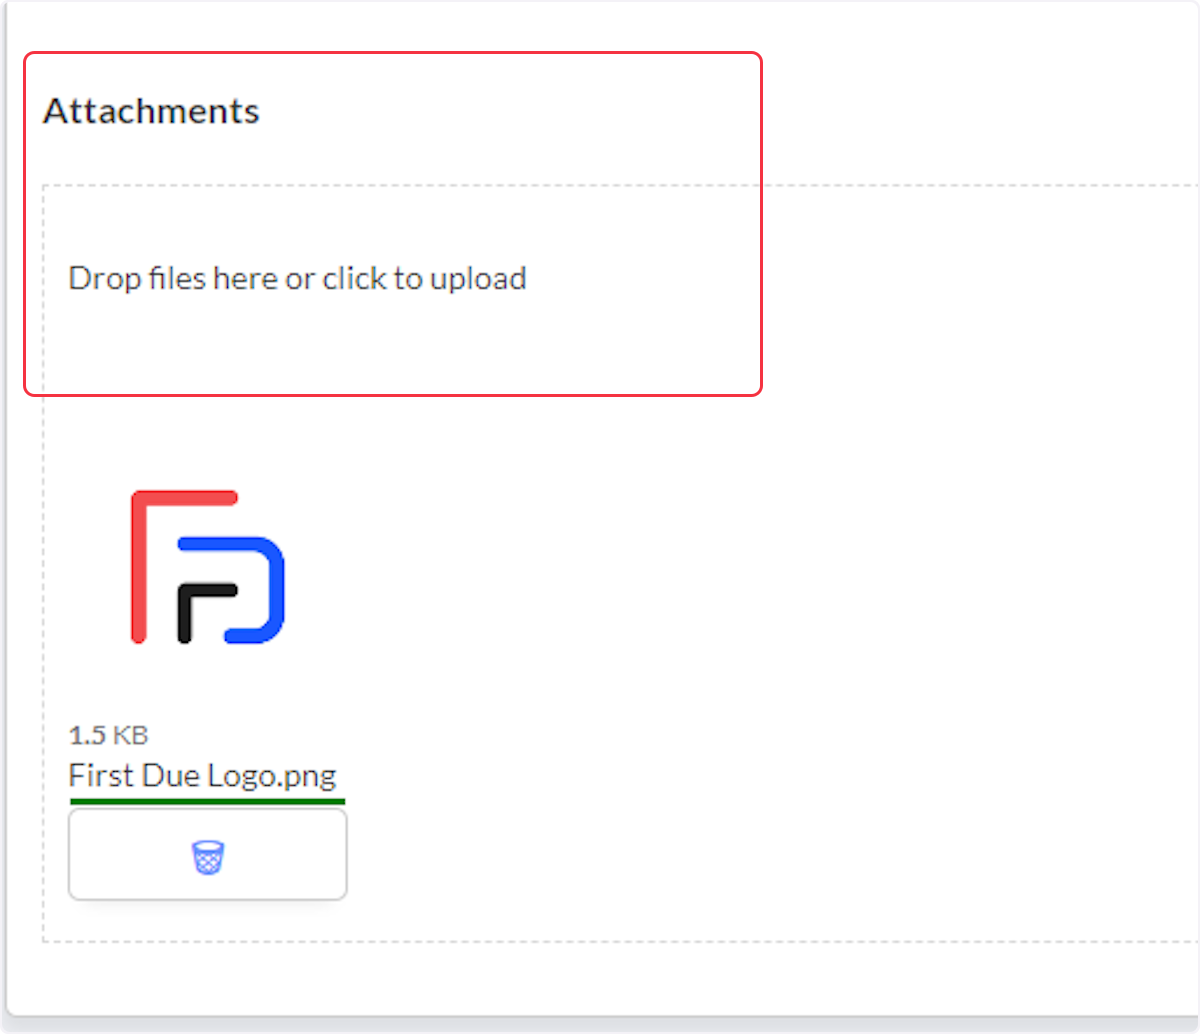 Add attachments to the Event by selecting on Drop files here or click to upload.